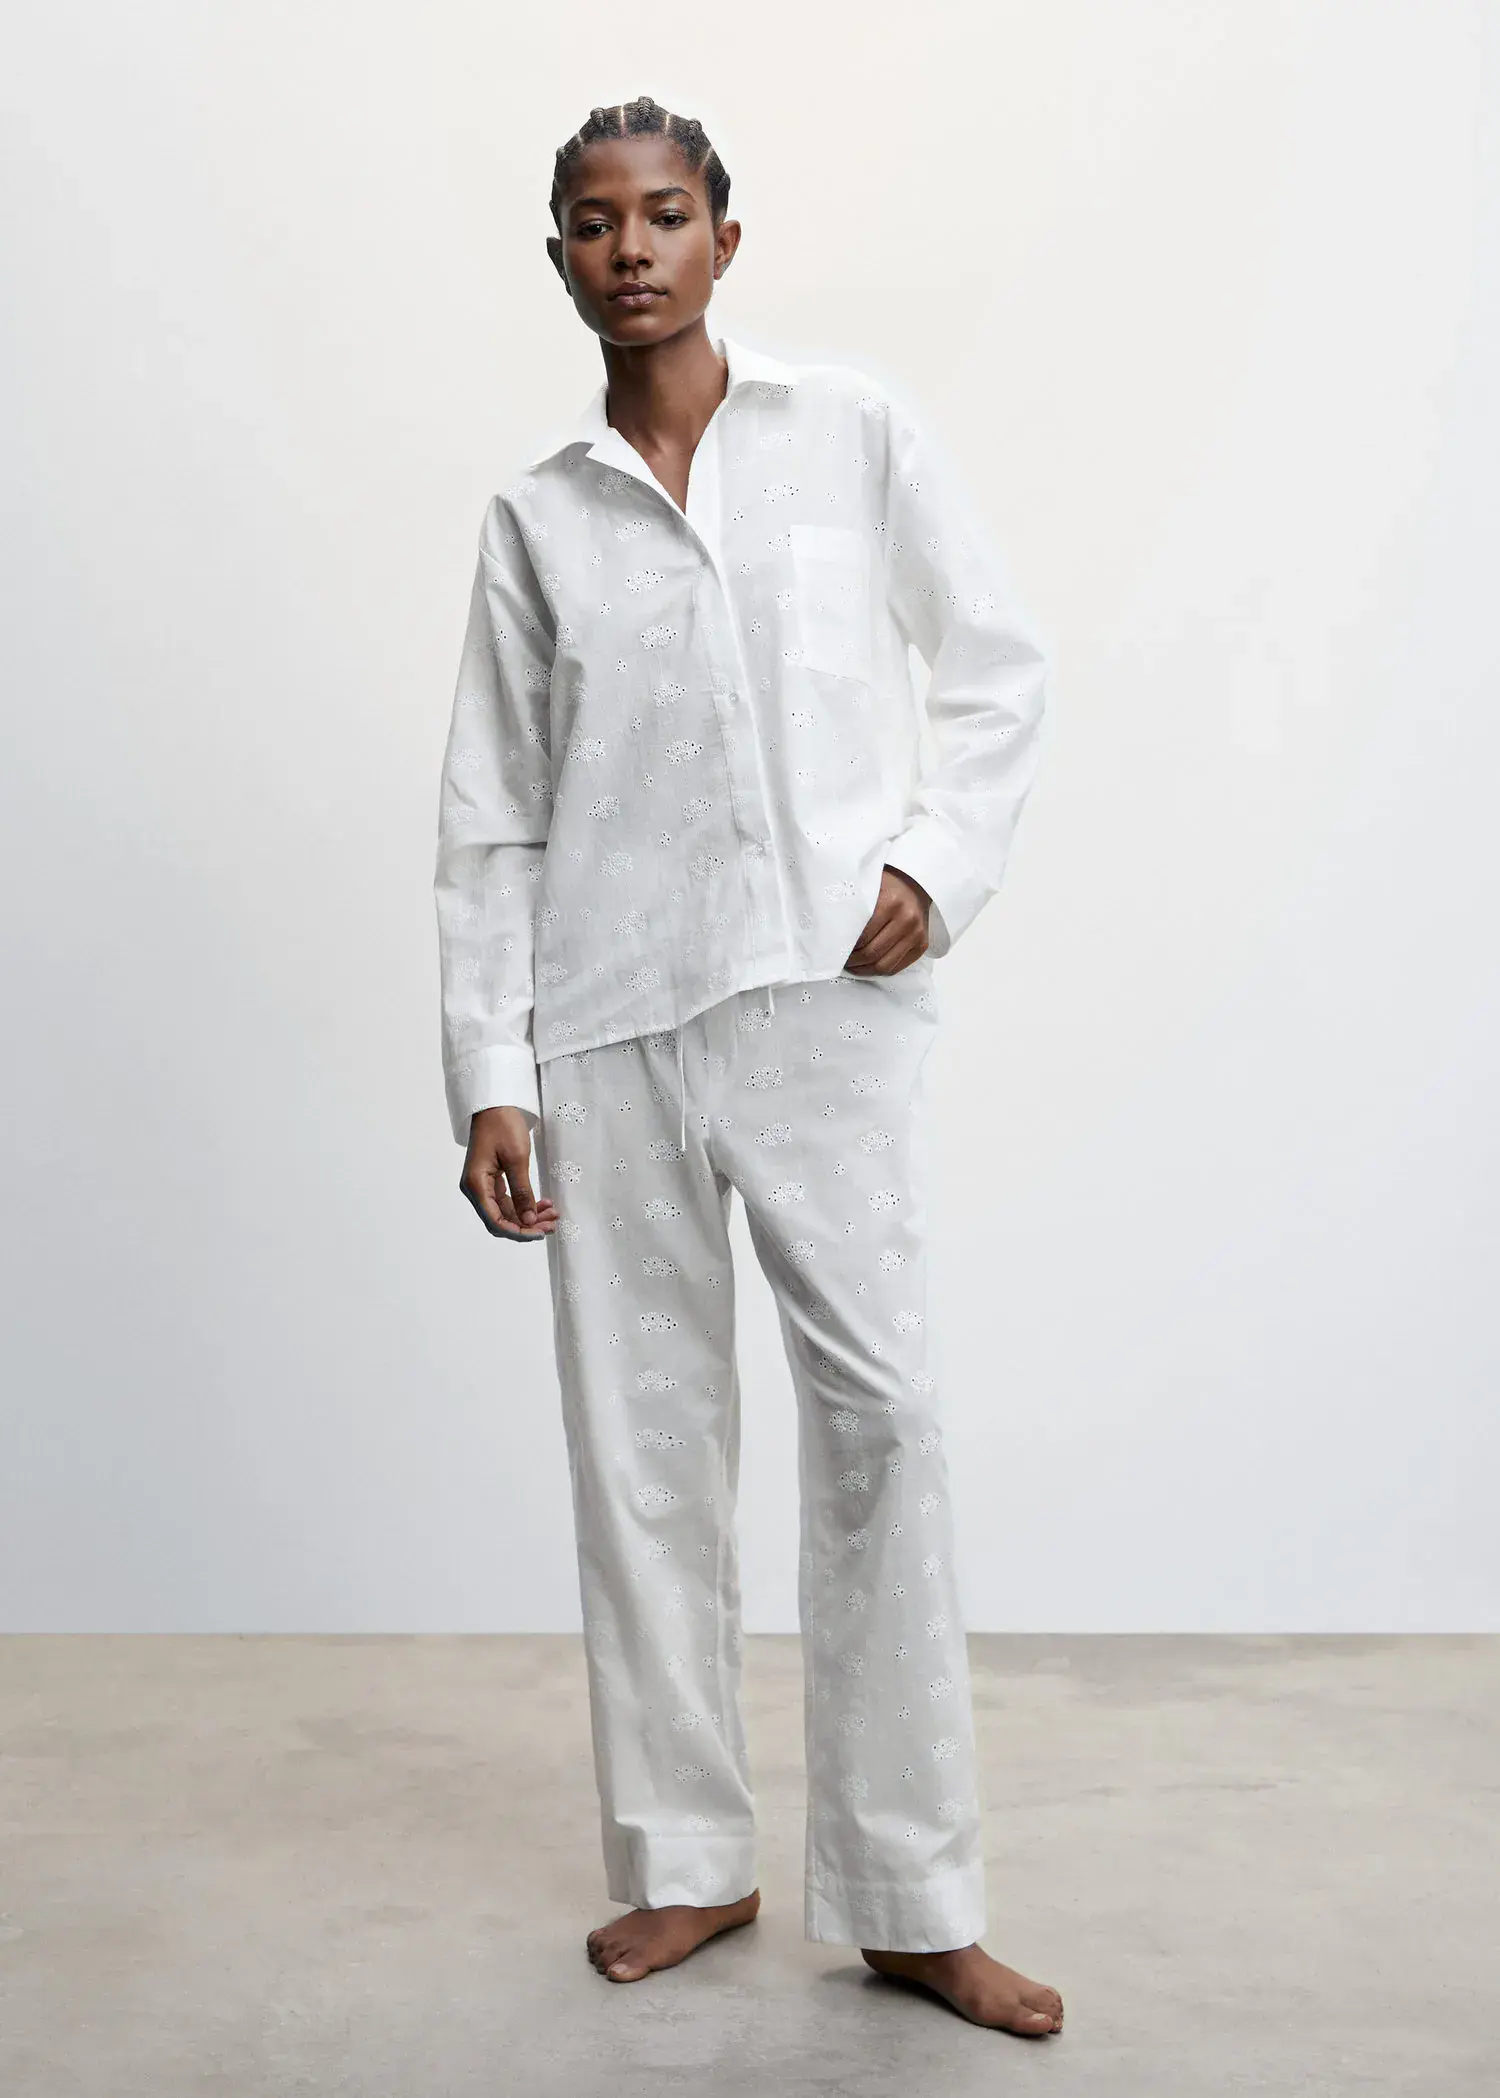 Mango Pyjama shirt with openwork details. a man in white shirt and pants standing next to a wall. 